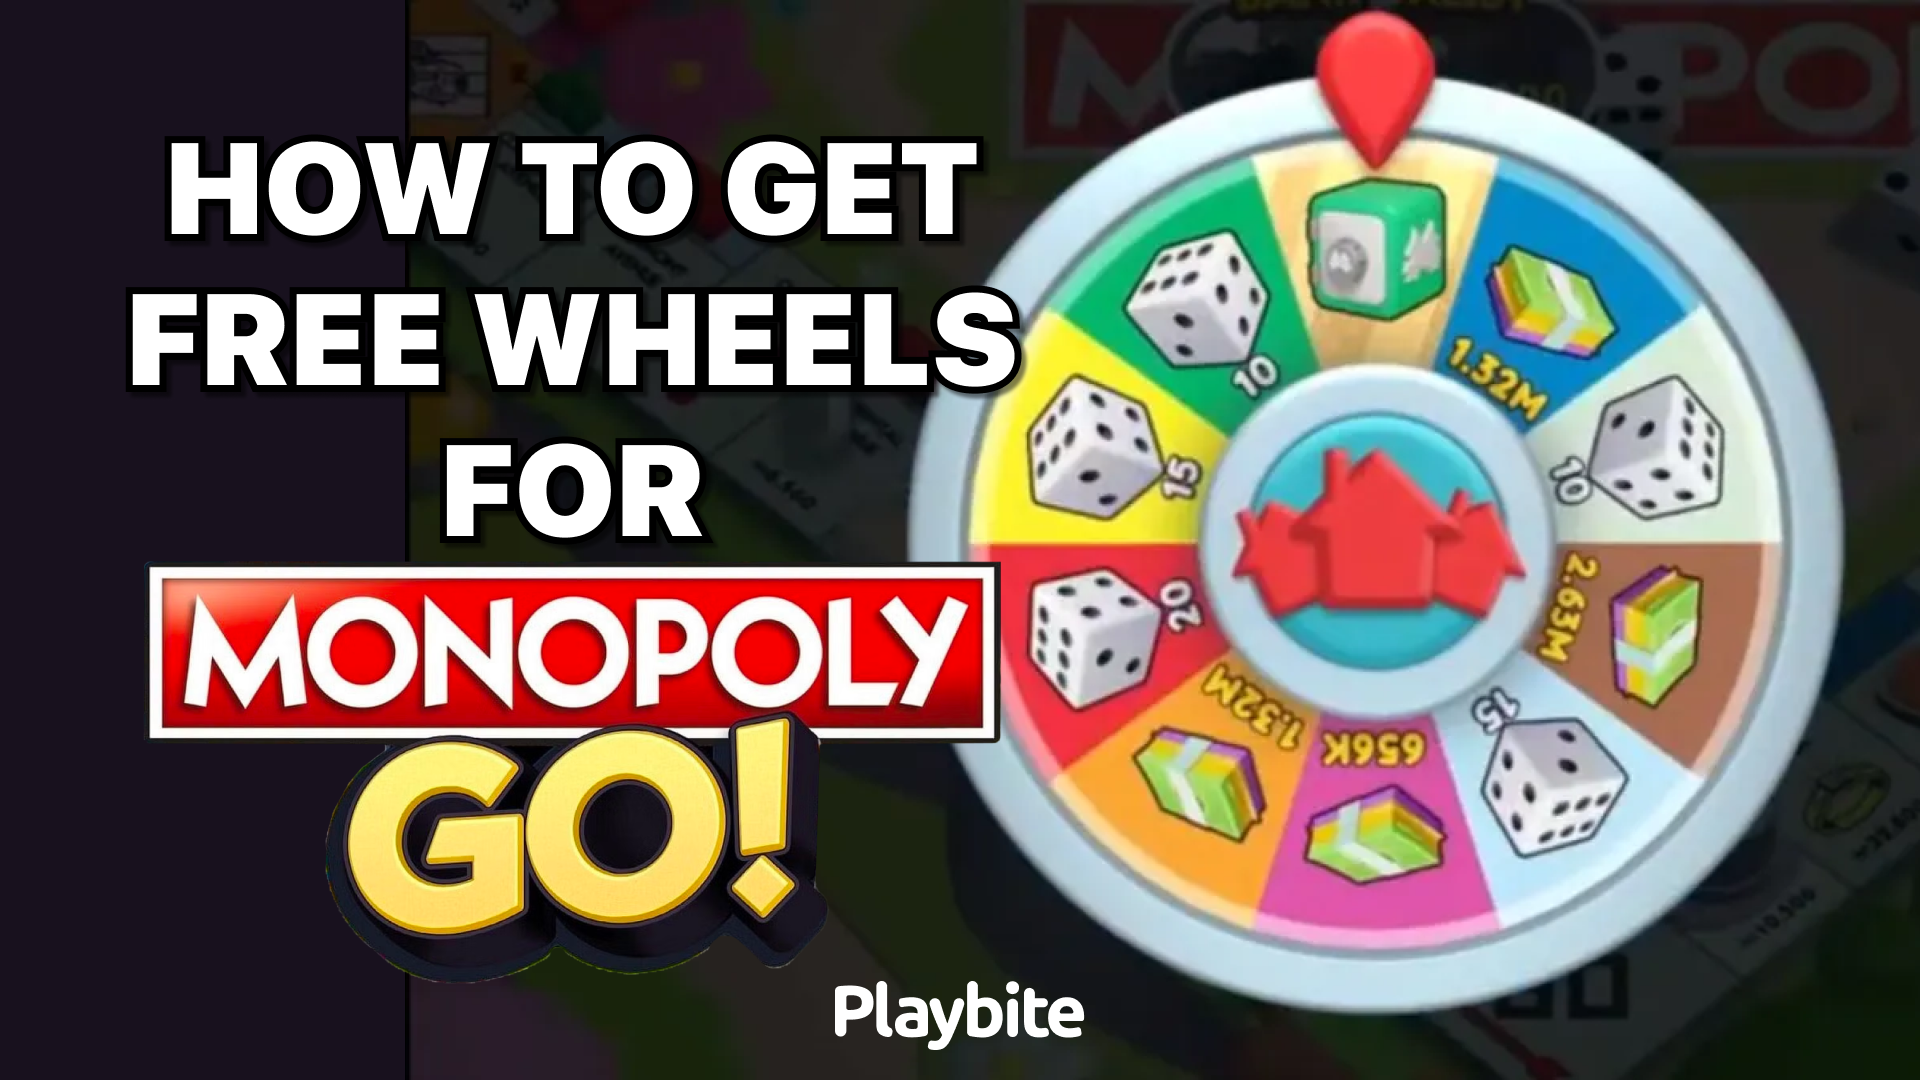 How To Get Free Wheels For Monopoly GO!